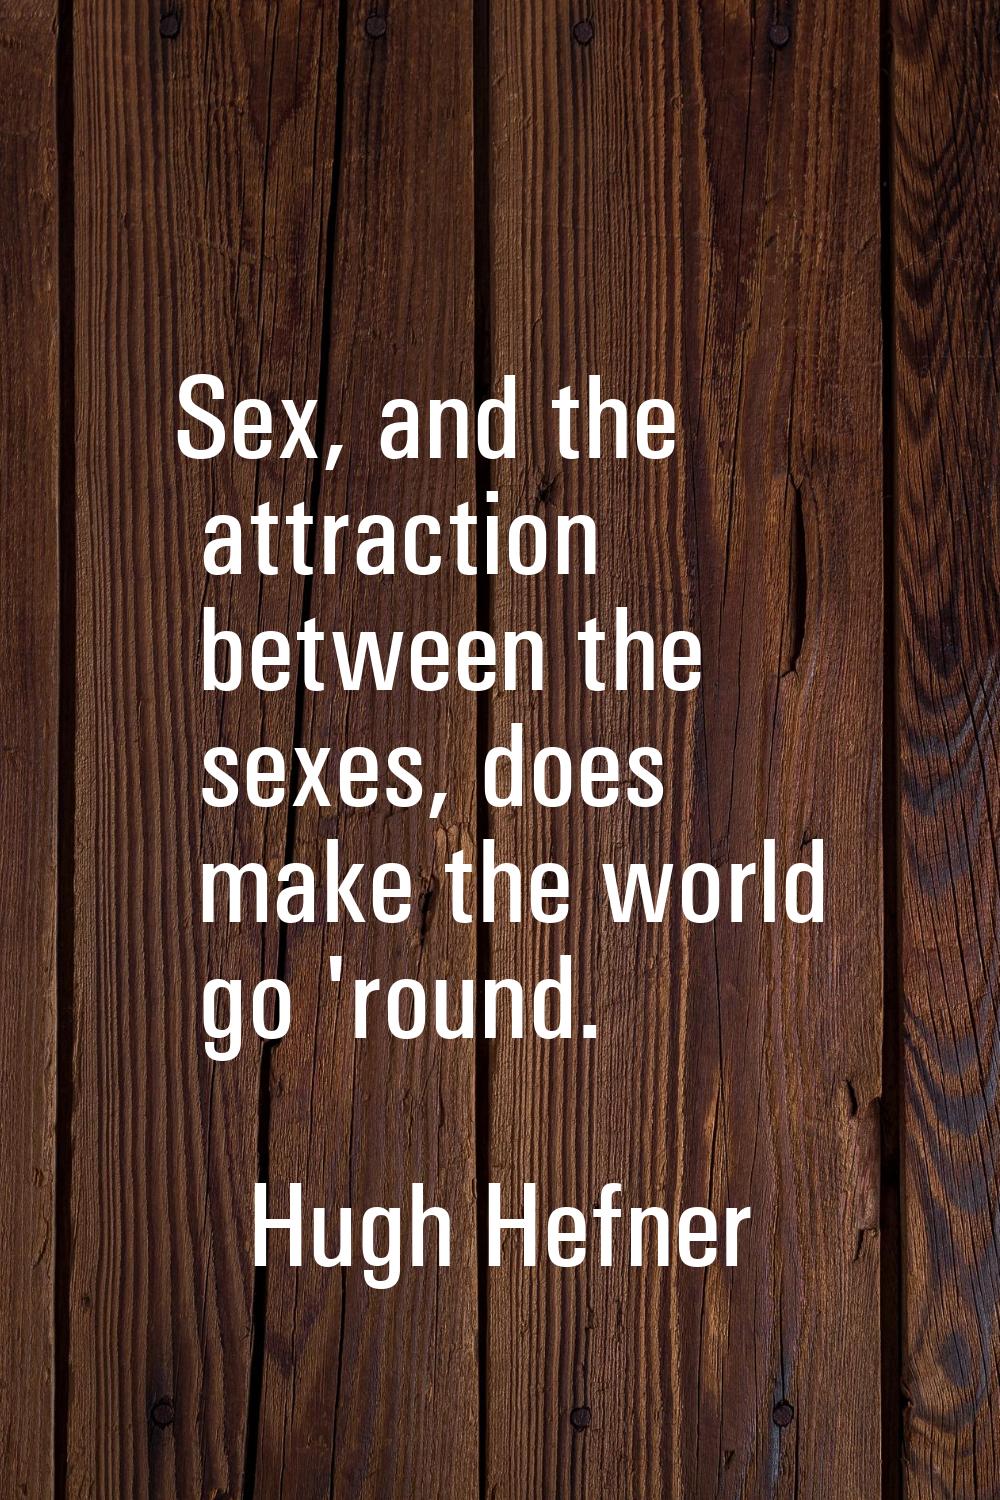 Sex, and the attraction between the sexes, does make the world go 'round.